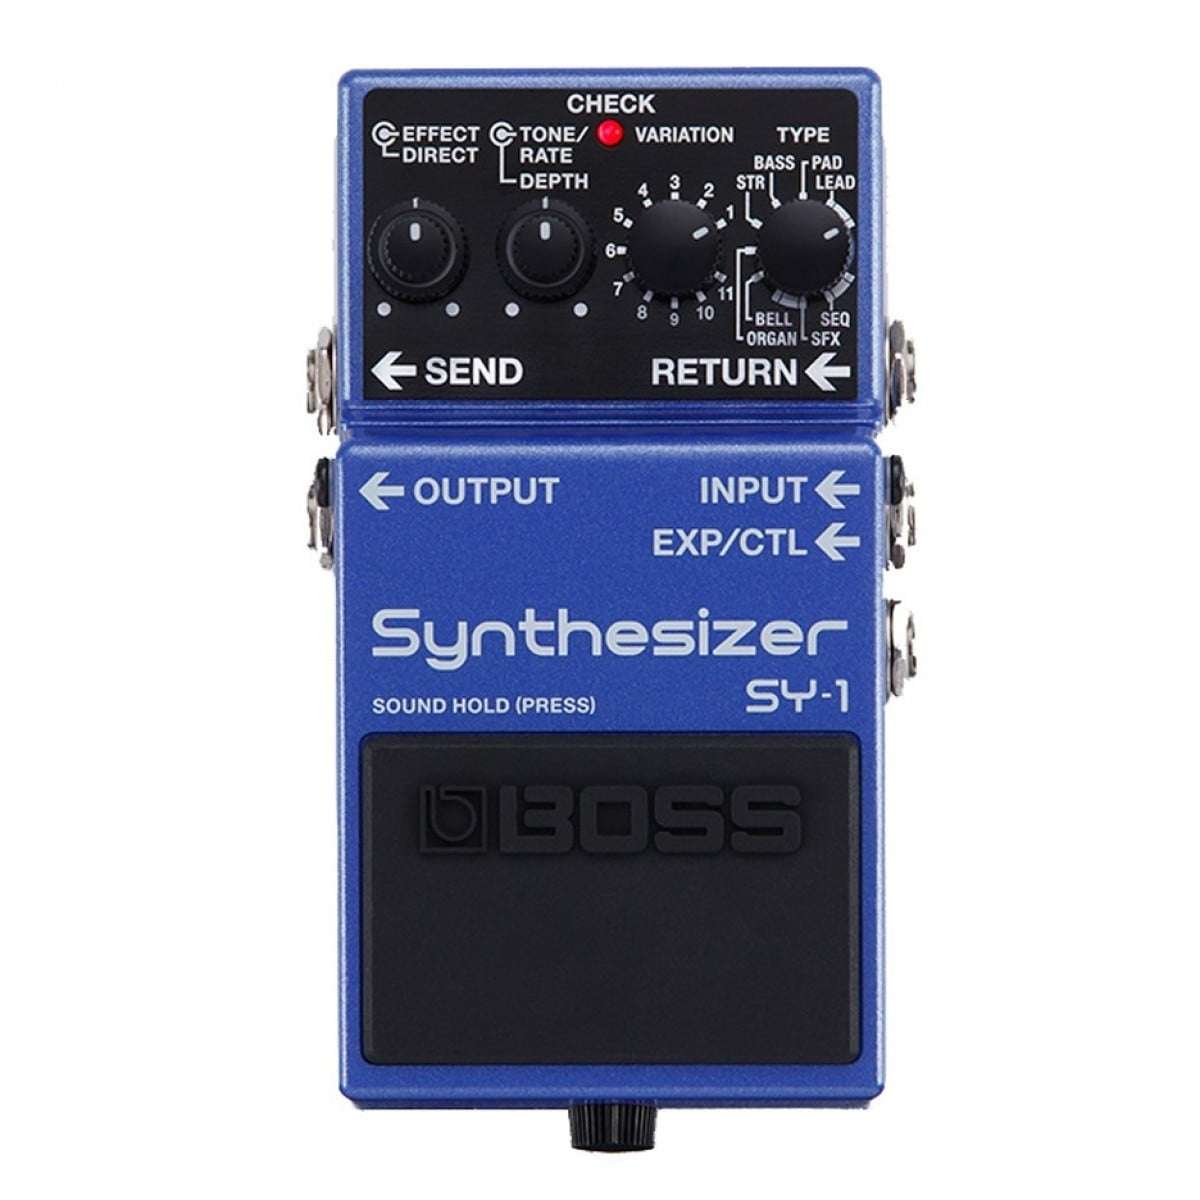 Boss SY-1 Guitar/Bass Synthesizer Pedal - New Boss        Synthesizer     EQ        Bass Analogue  Guitar Effect Pedal